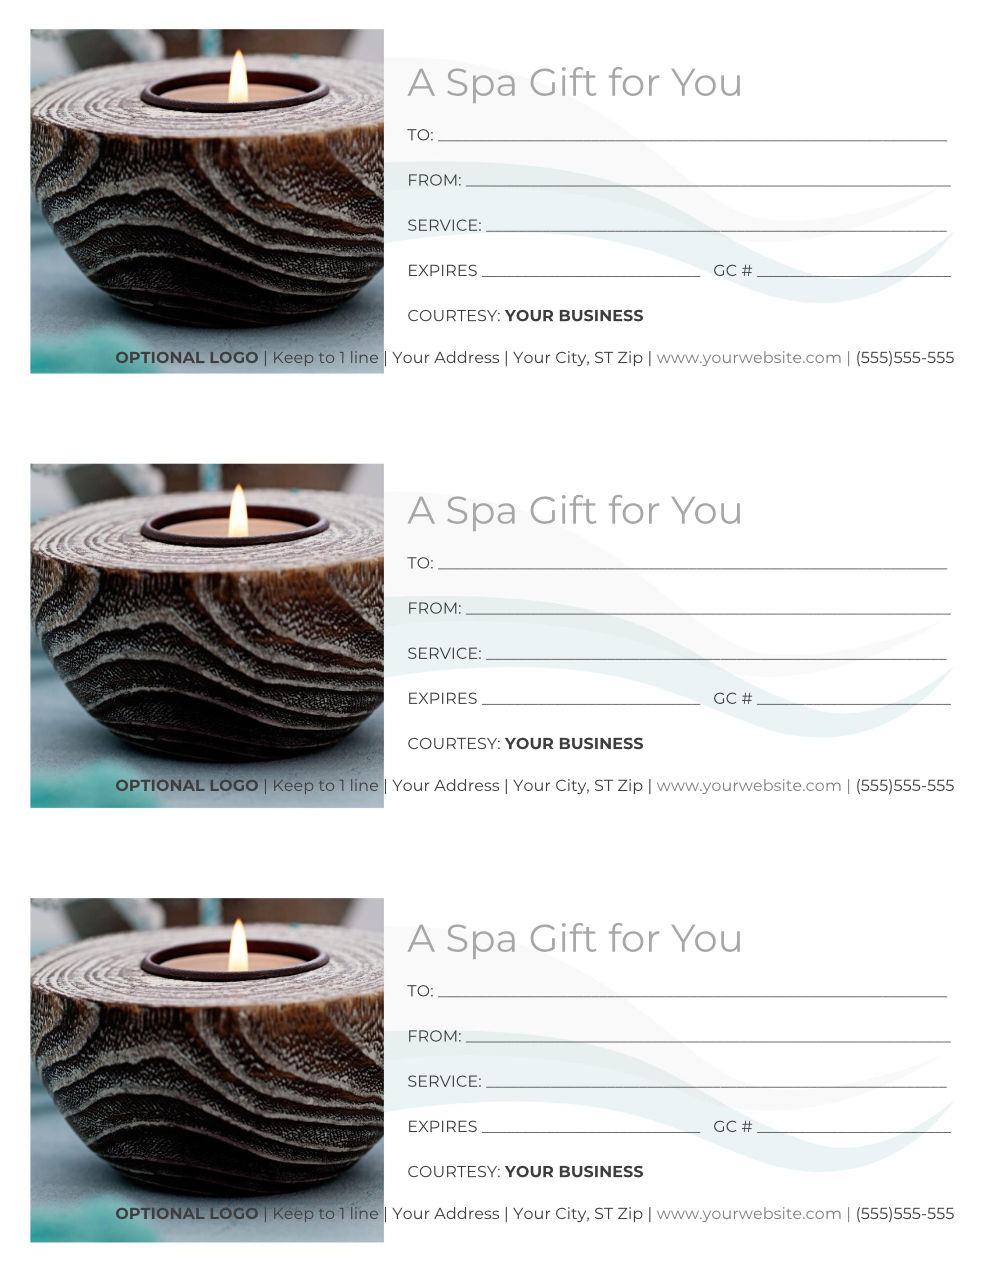 Free Gift Certificate Templates For Massage And Spa Inside Massage Gift Certificate Template Free Download